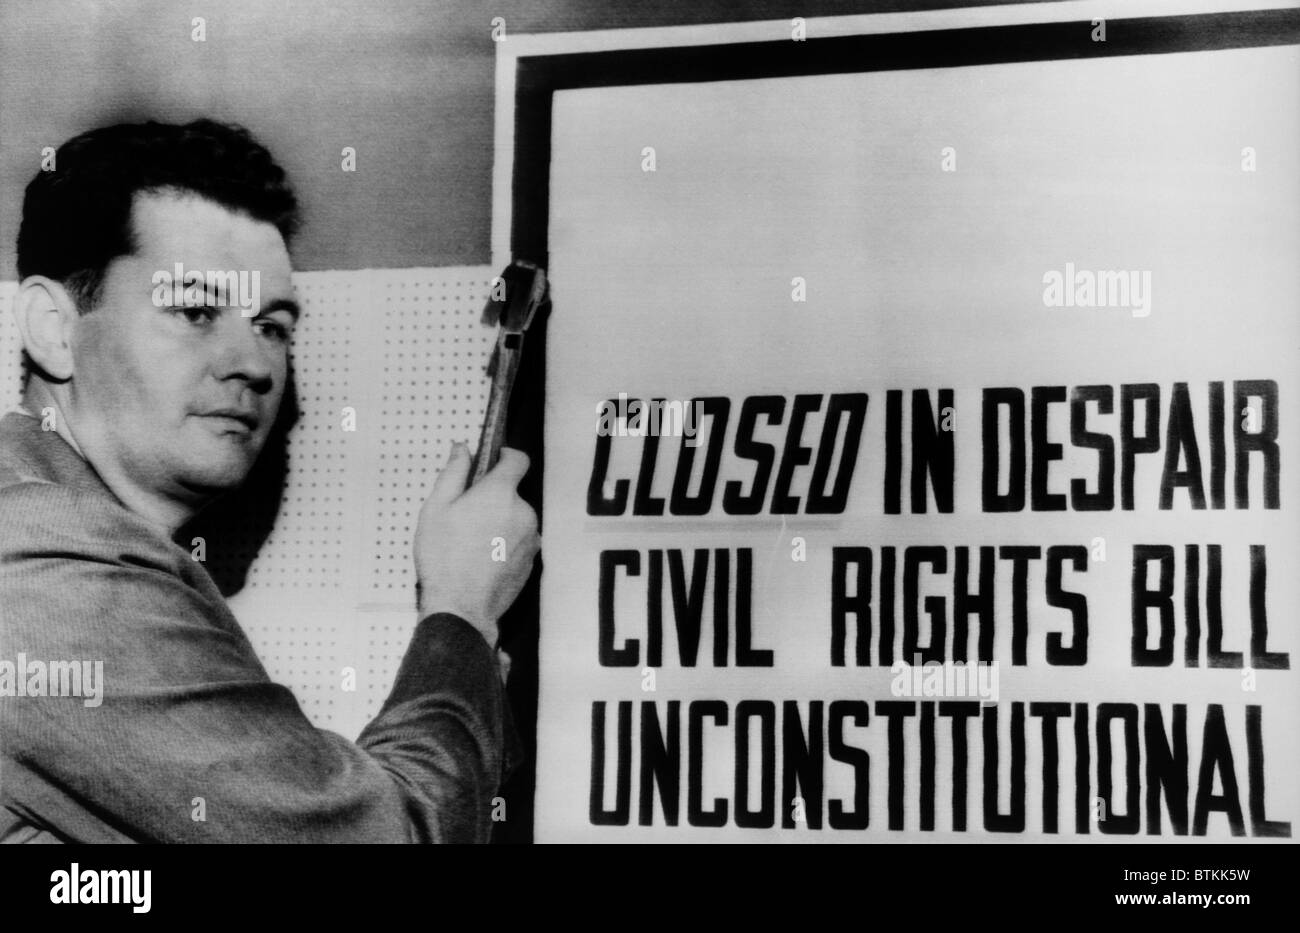 Sid Kelly of Jackson, Mississippi, nails up 'Closed-In despair-Civil Rights Bill unconstitutional' sign at Robert E. Lee Hotel, Stock Photo